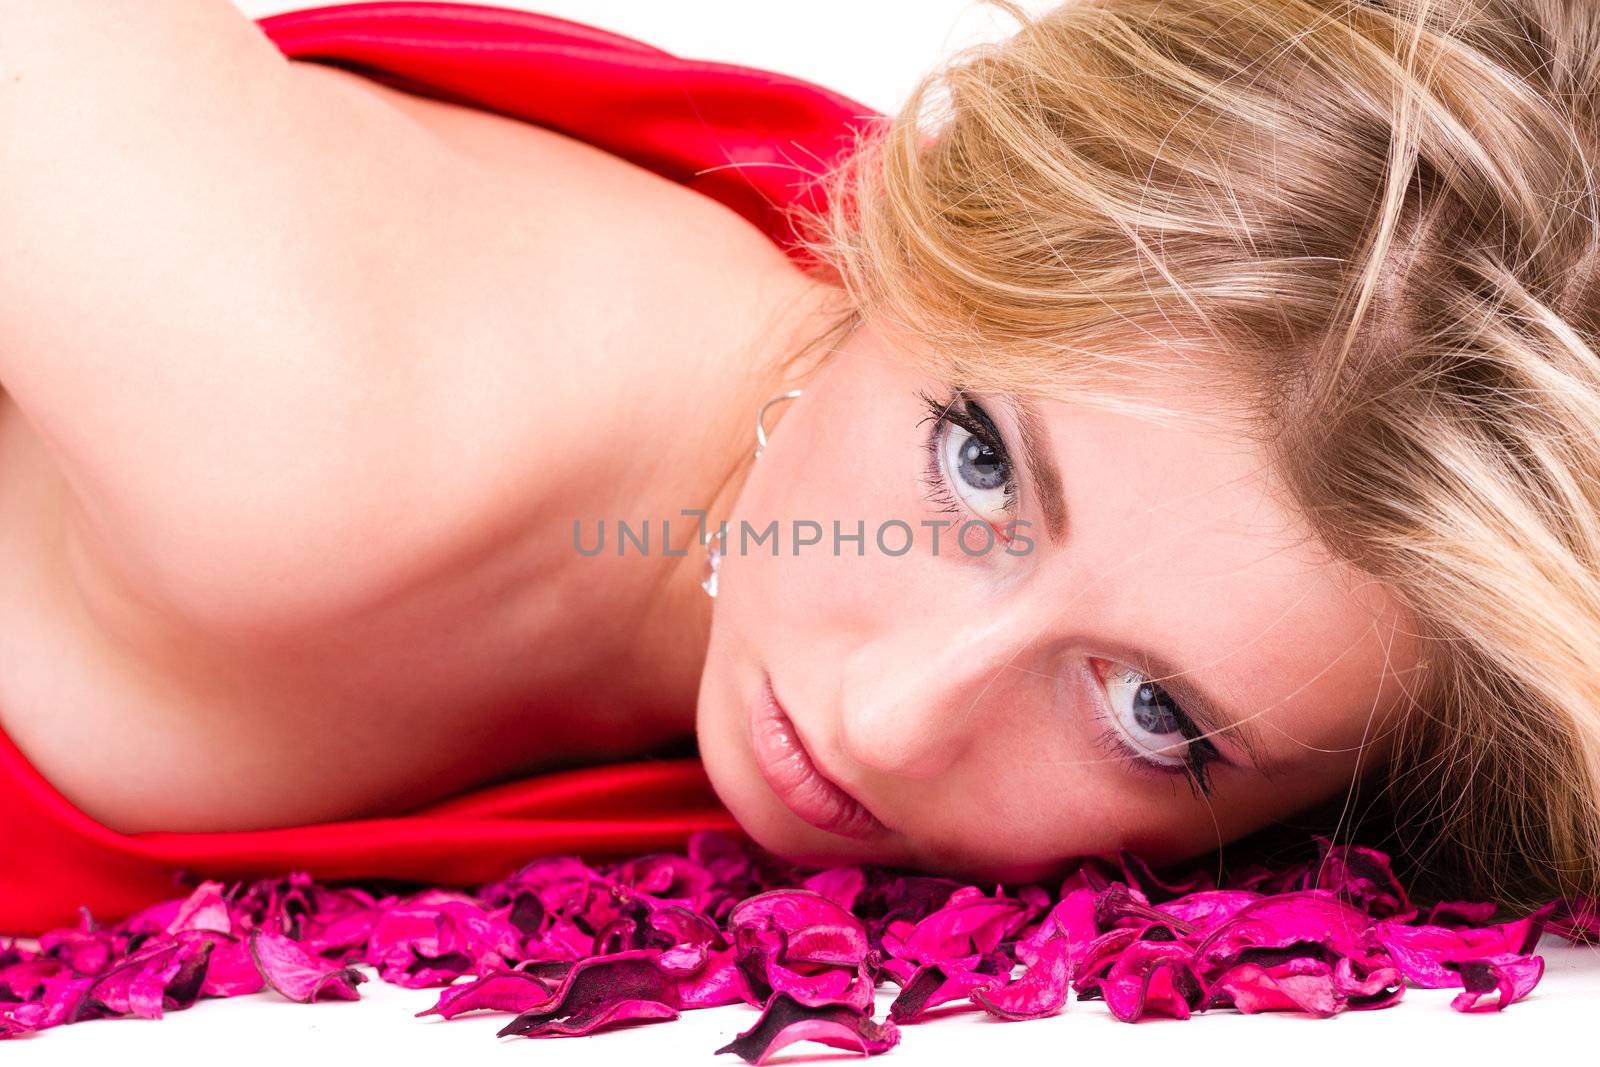 shot of sexy woman in red dress with rose petals, isolated on white background